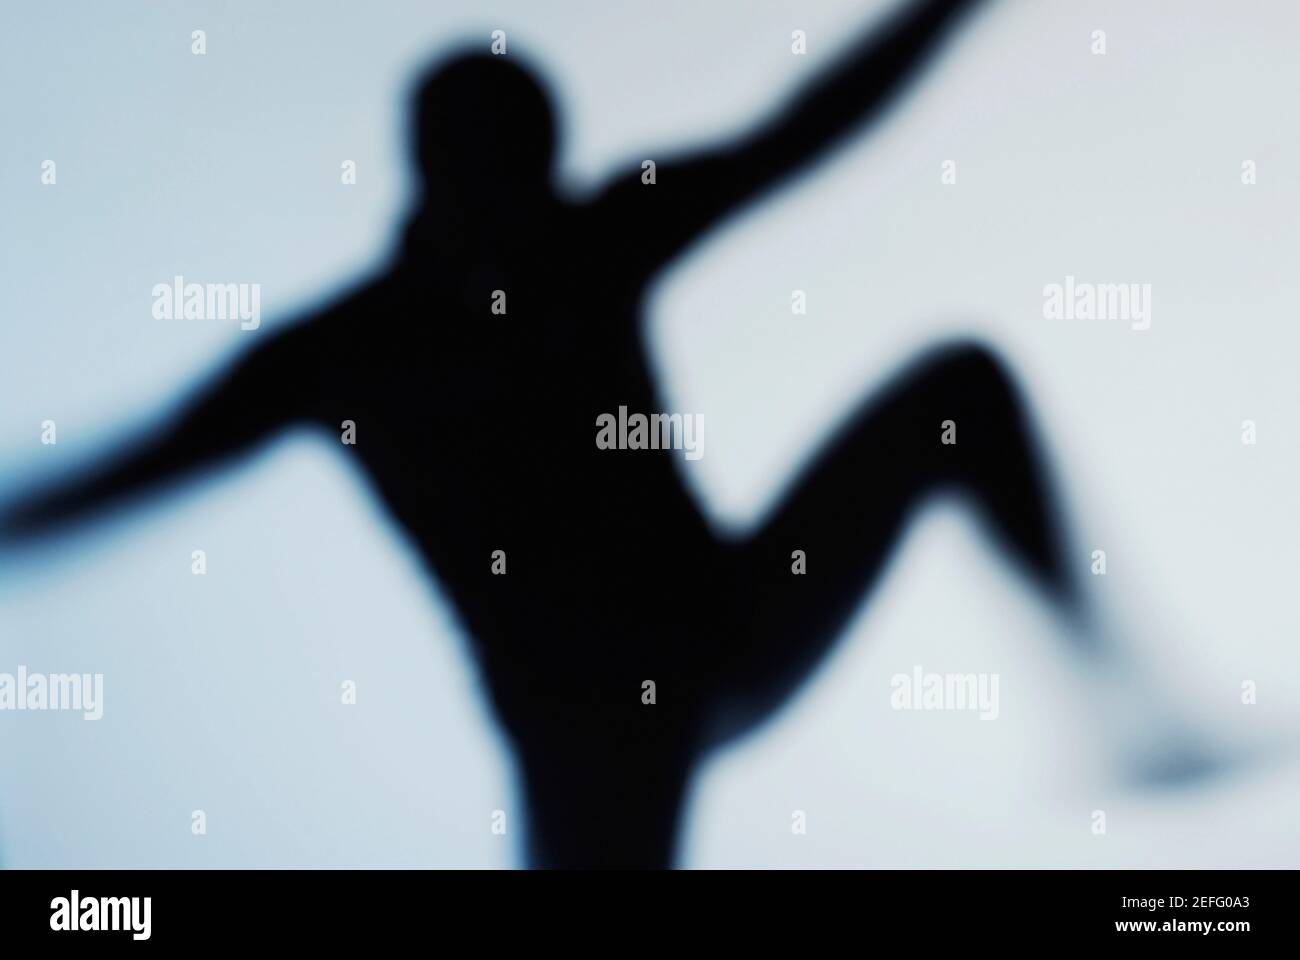 Silhouette of a person dancing Stock Photo